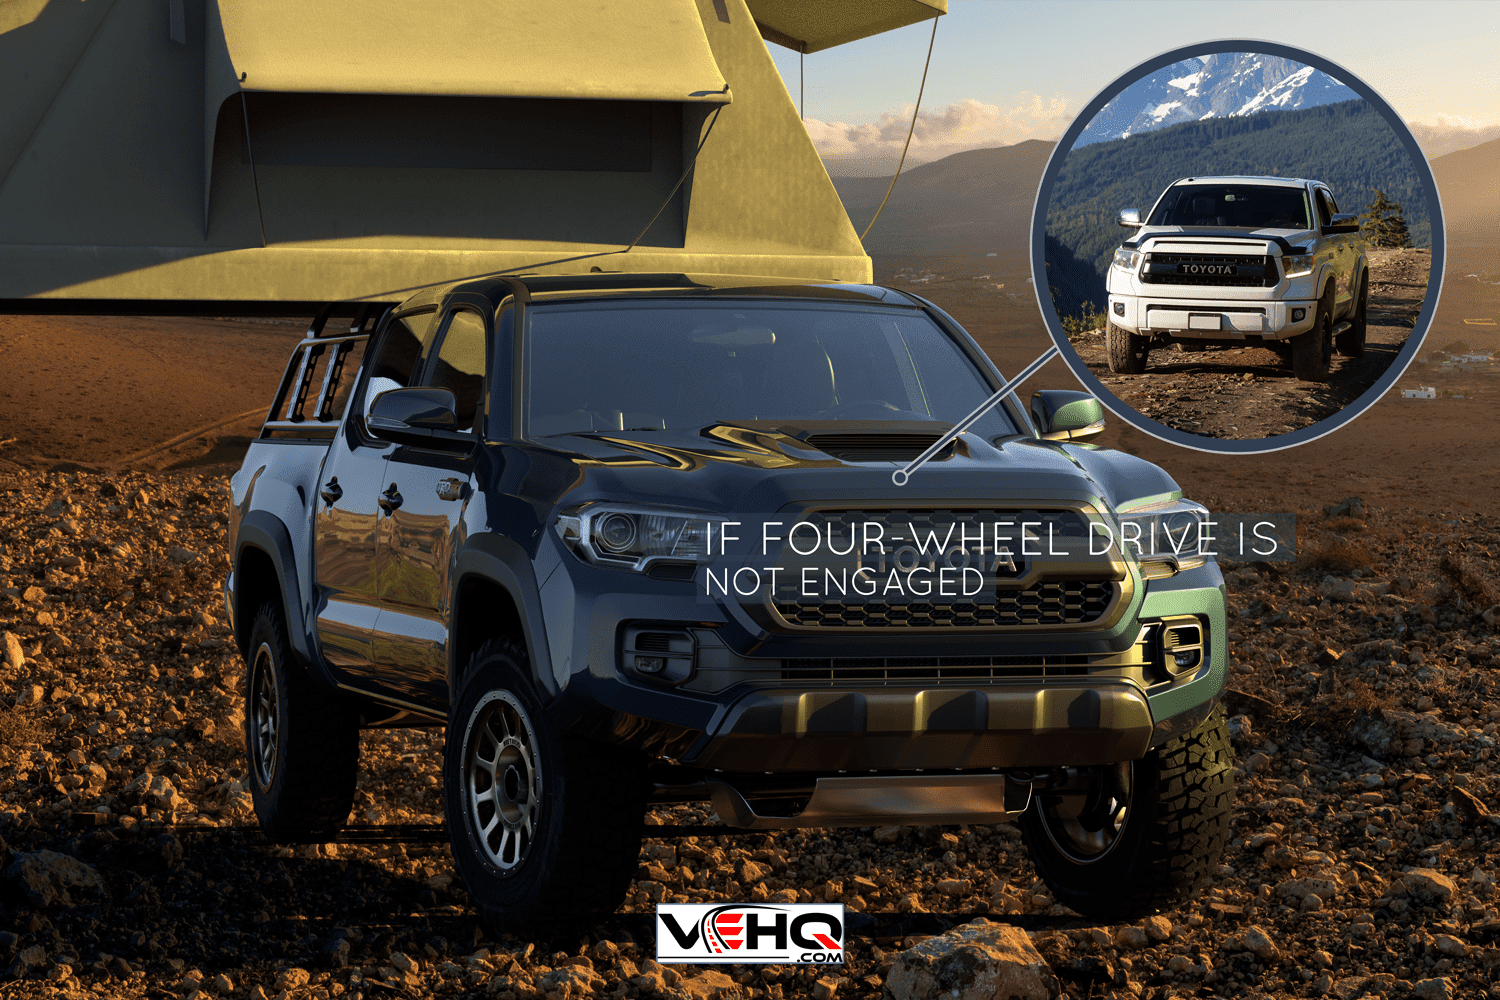 Toyota Tacoma equipped with a camping tent in mountainous - Are Toyota Tacomas Rear Wheel Drive